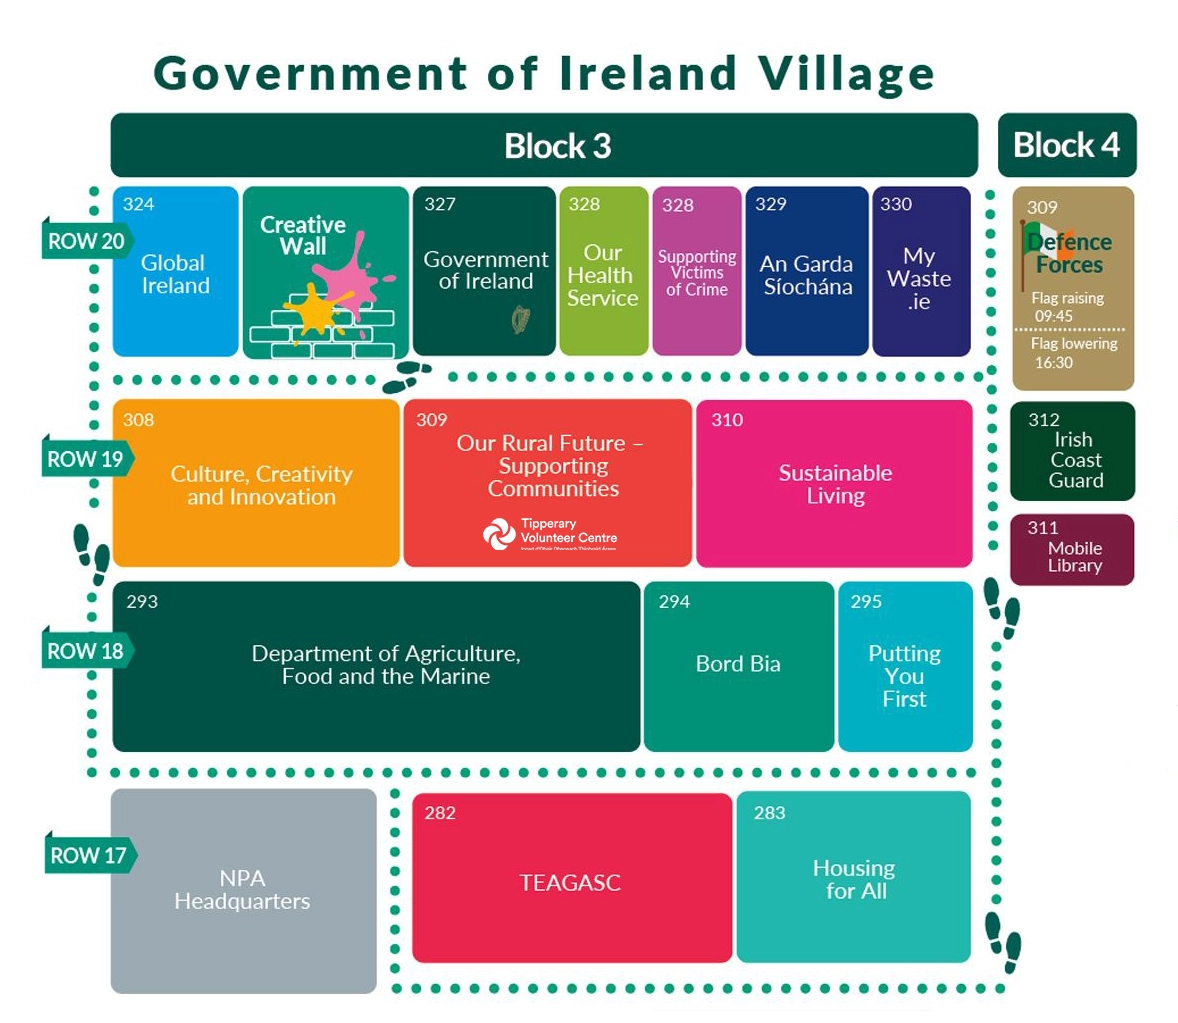 Government of Ireland village map - national ploughing championships 2022.